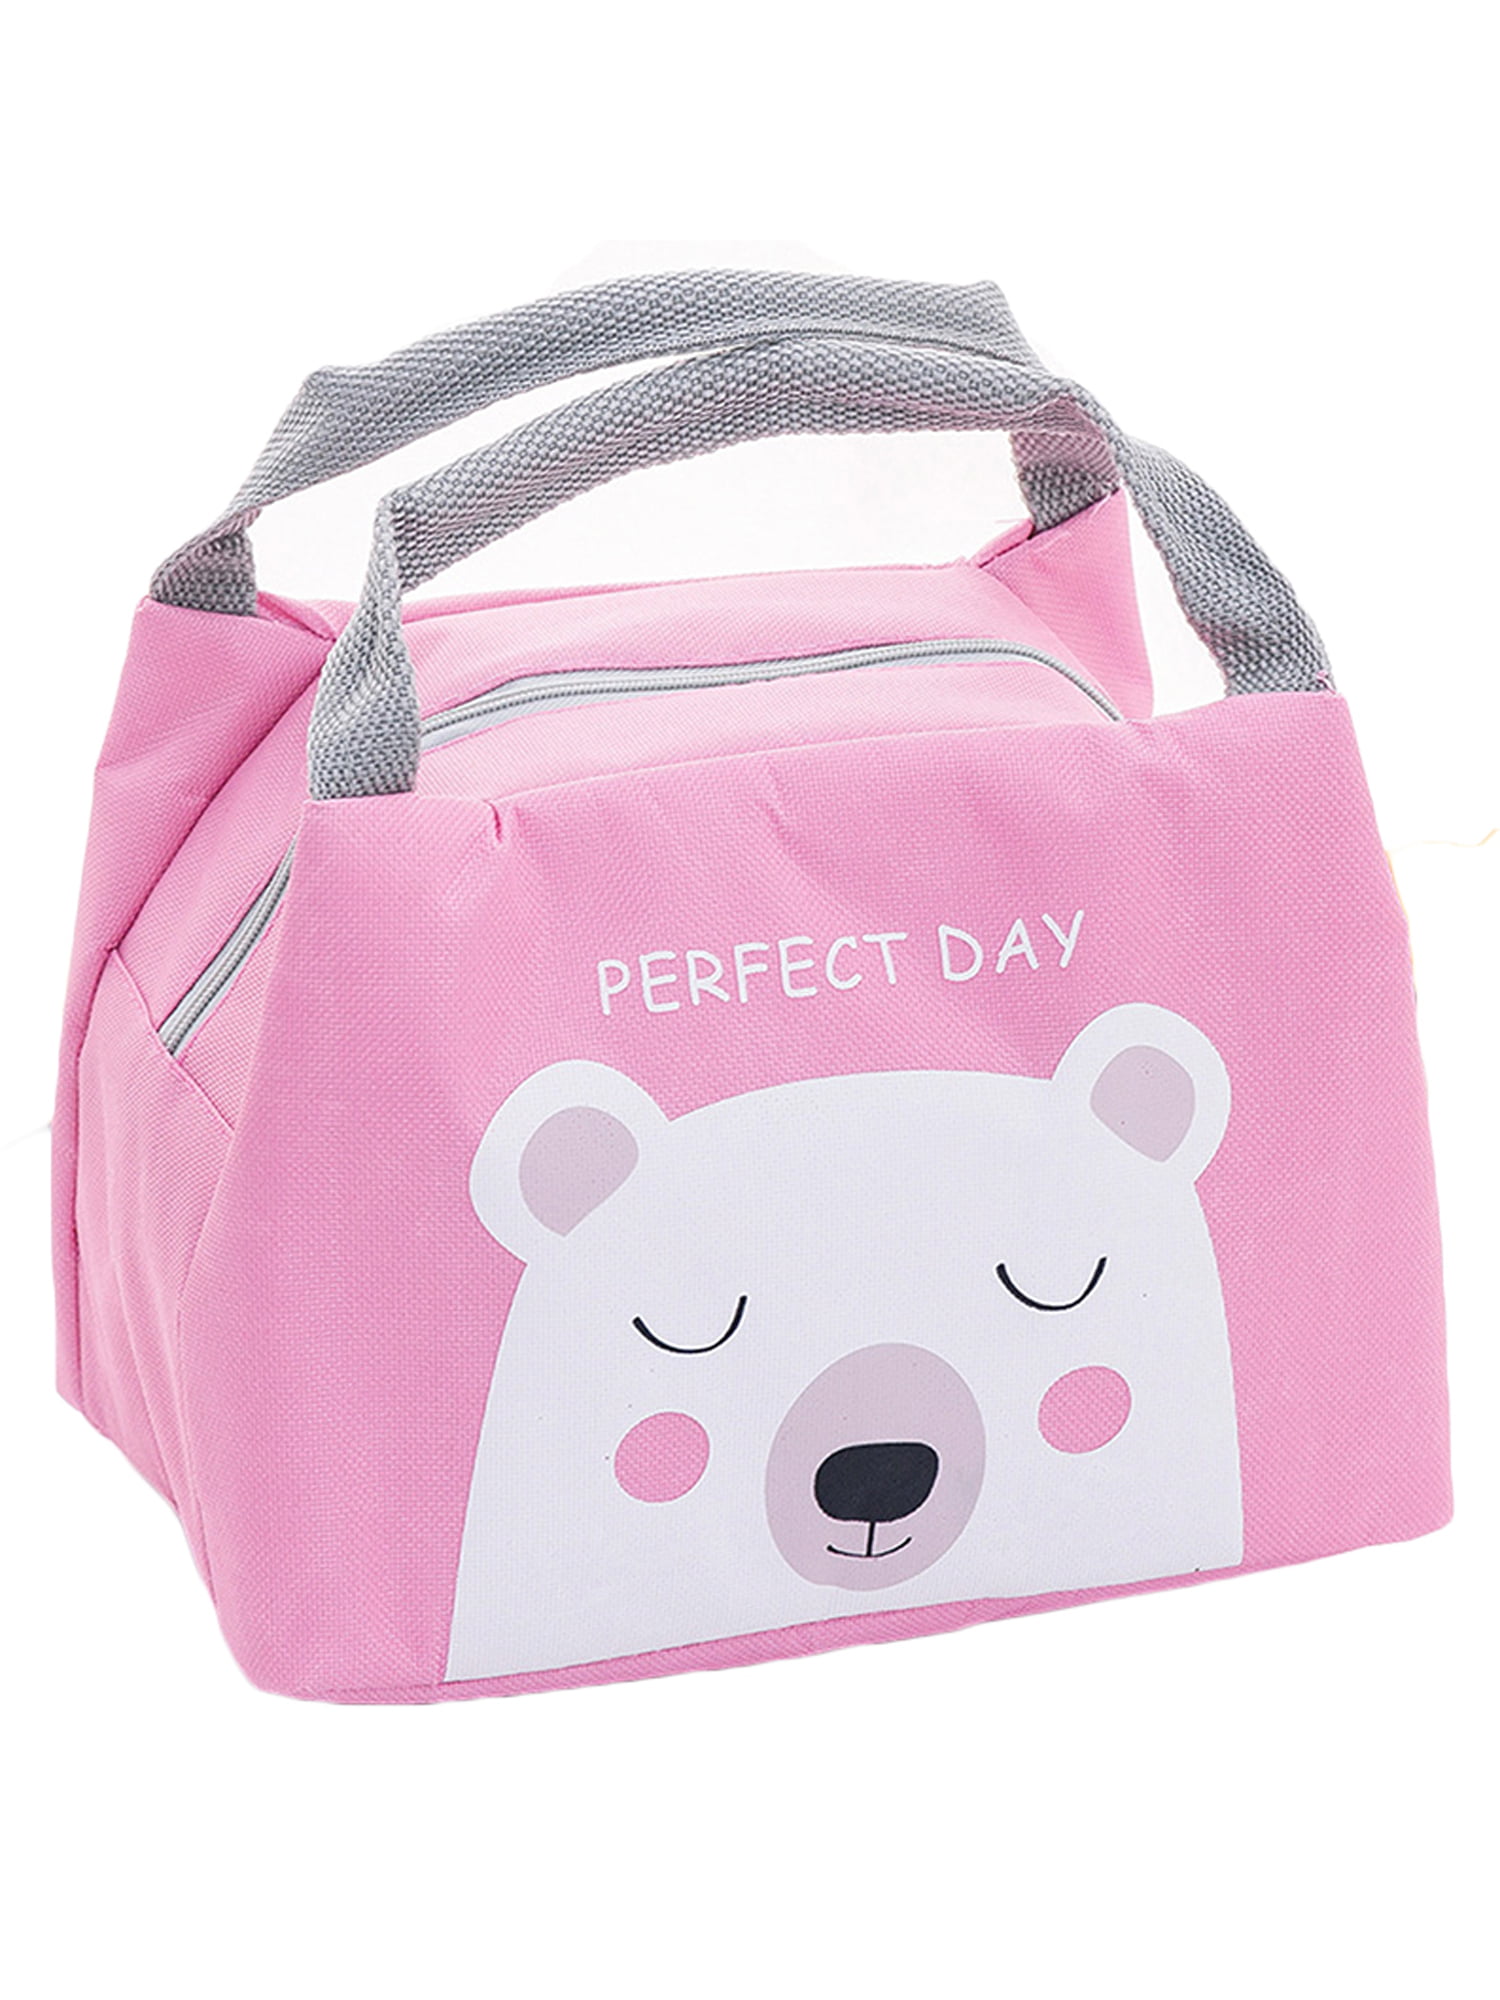 Children Kids Adult Lunch Bags Insulated Cool Bag Picnic Bags School Lunch Box ^